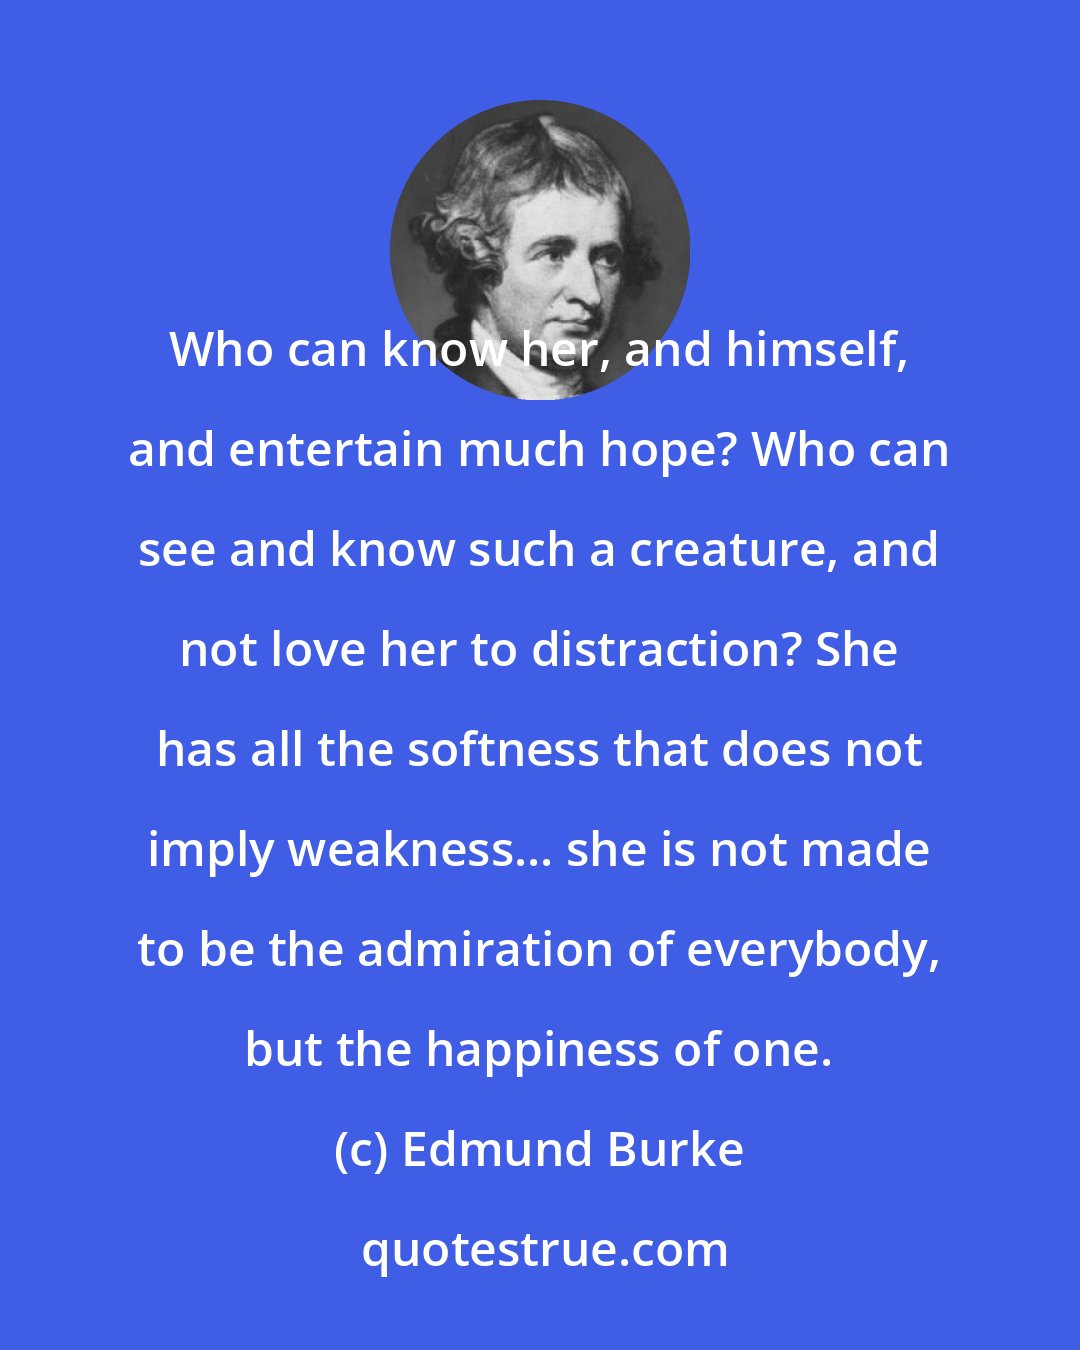 Edmund Burke: Who can know her, and himself, and entertain much hope? Who can see and know such a creature, and not love her to distraction? She has all the softness that does not imply weakness... she is not made to be the admiration of everybody, but the happiness of one.